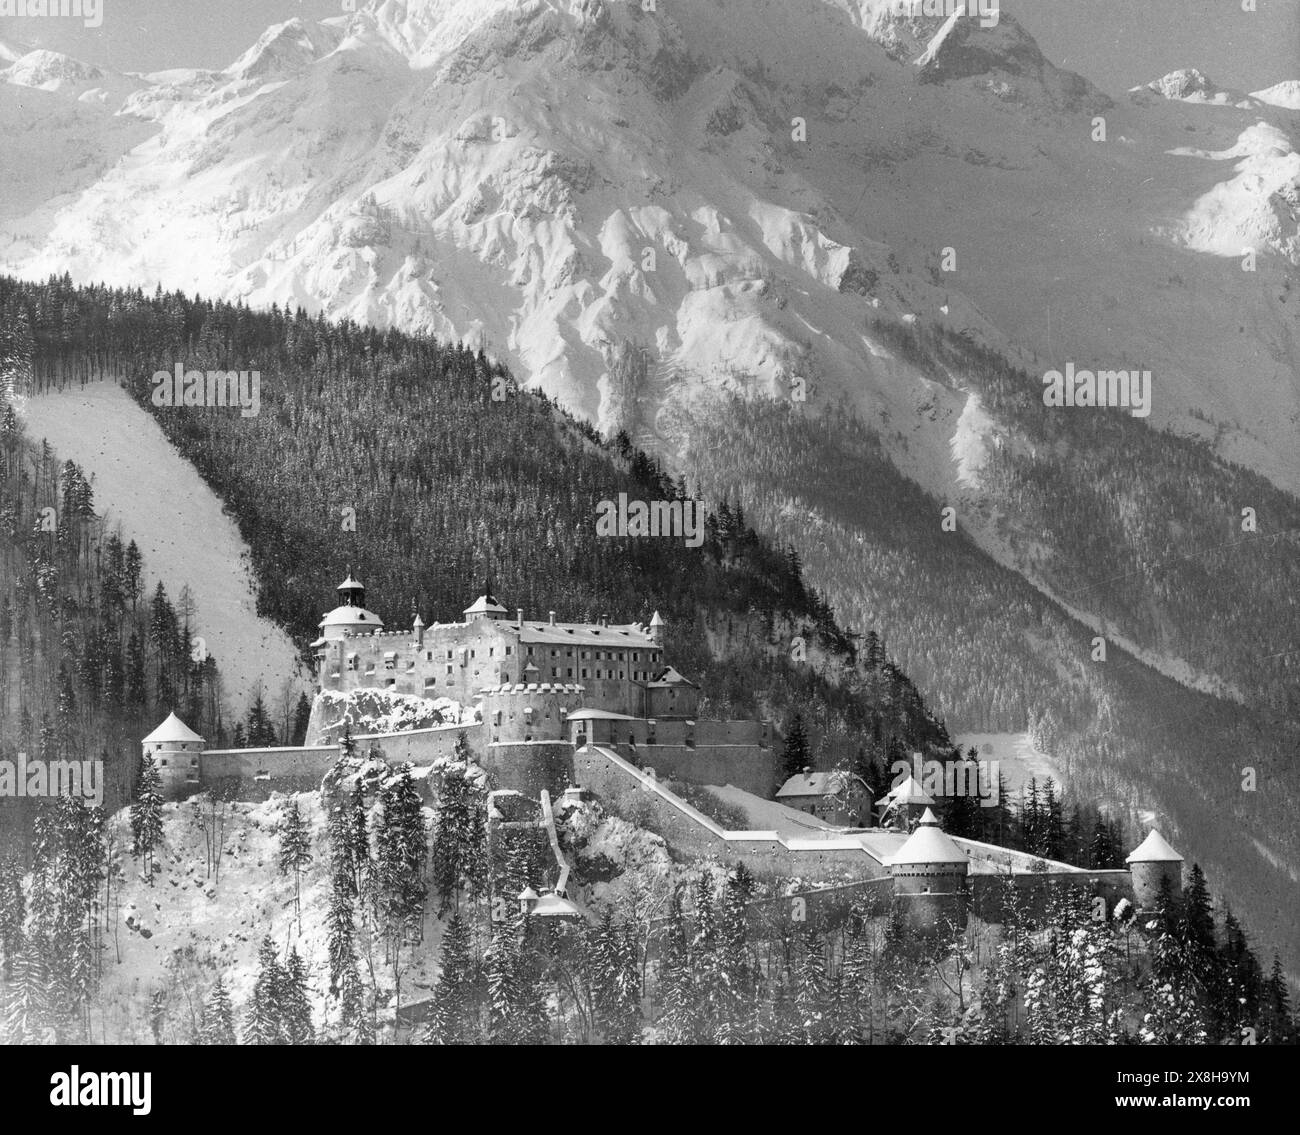 Burg  Hohenwerfen castle in Werfen, Austria used as Schloss Adler for the WW2 film WHERE EAGLES DARE 1968 Director BRIAN G. HUTTON Story and Screenplay ALISTAIR MacLEAN Music RON GOODWIN  Gershwin-Kastner Productions / Winkast Film Productions / Metro Goldwyn Mayer Stock Photo